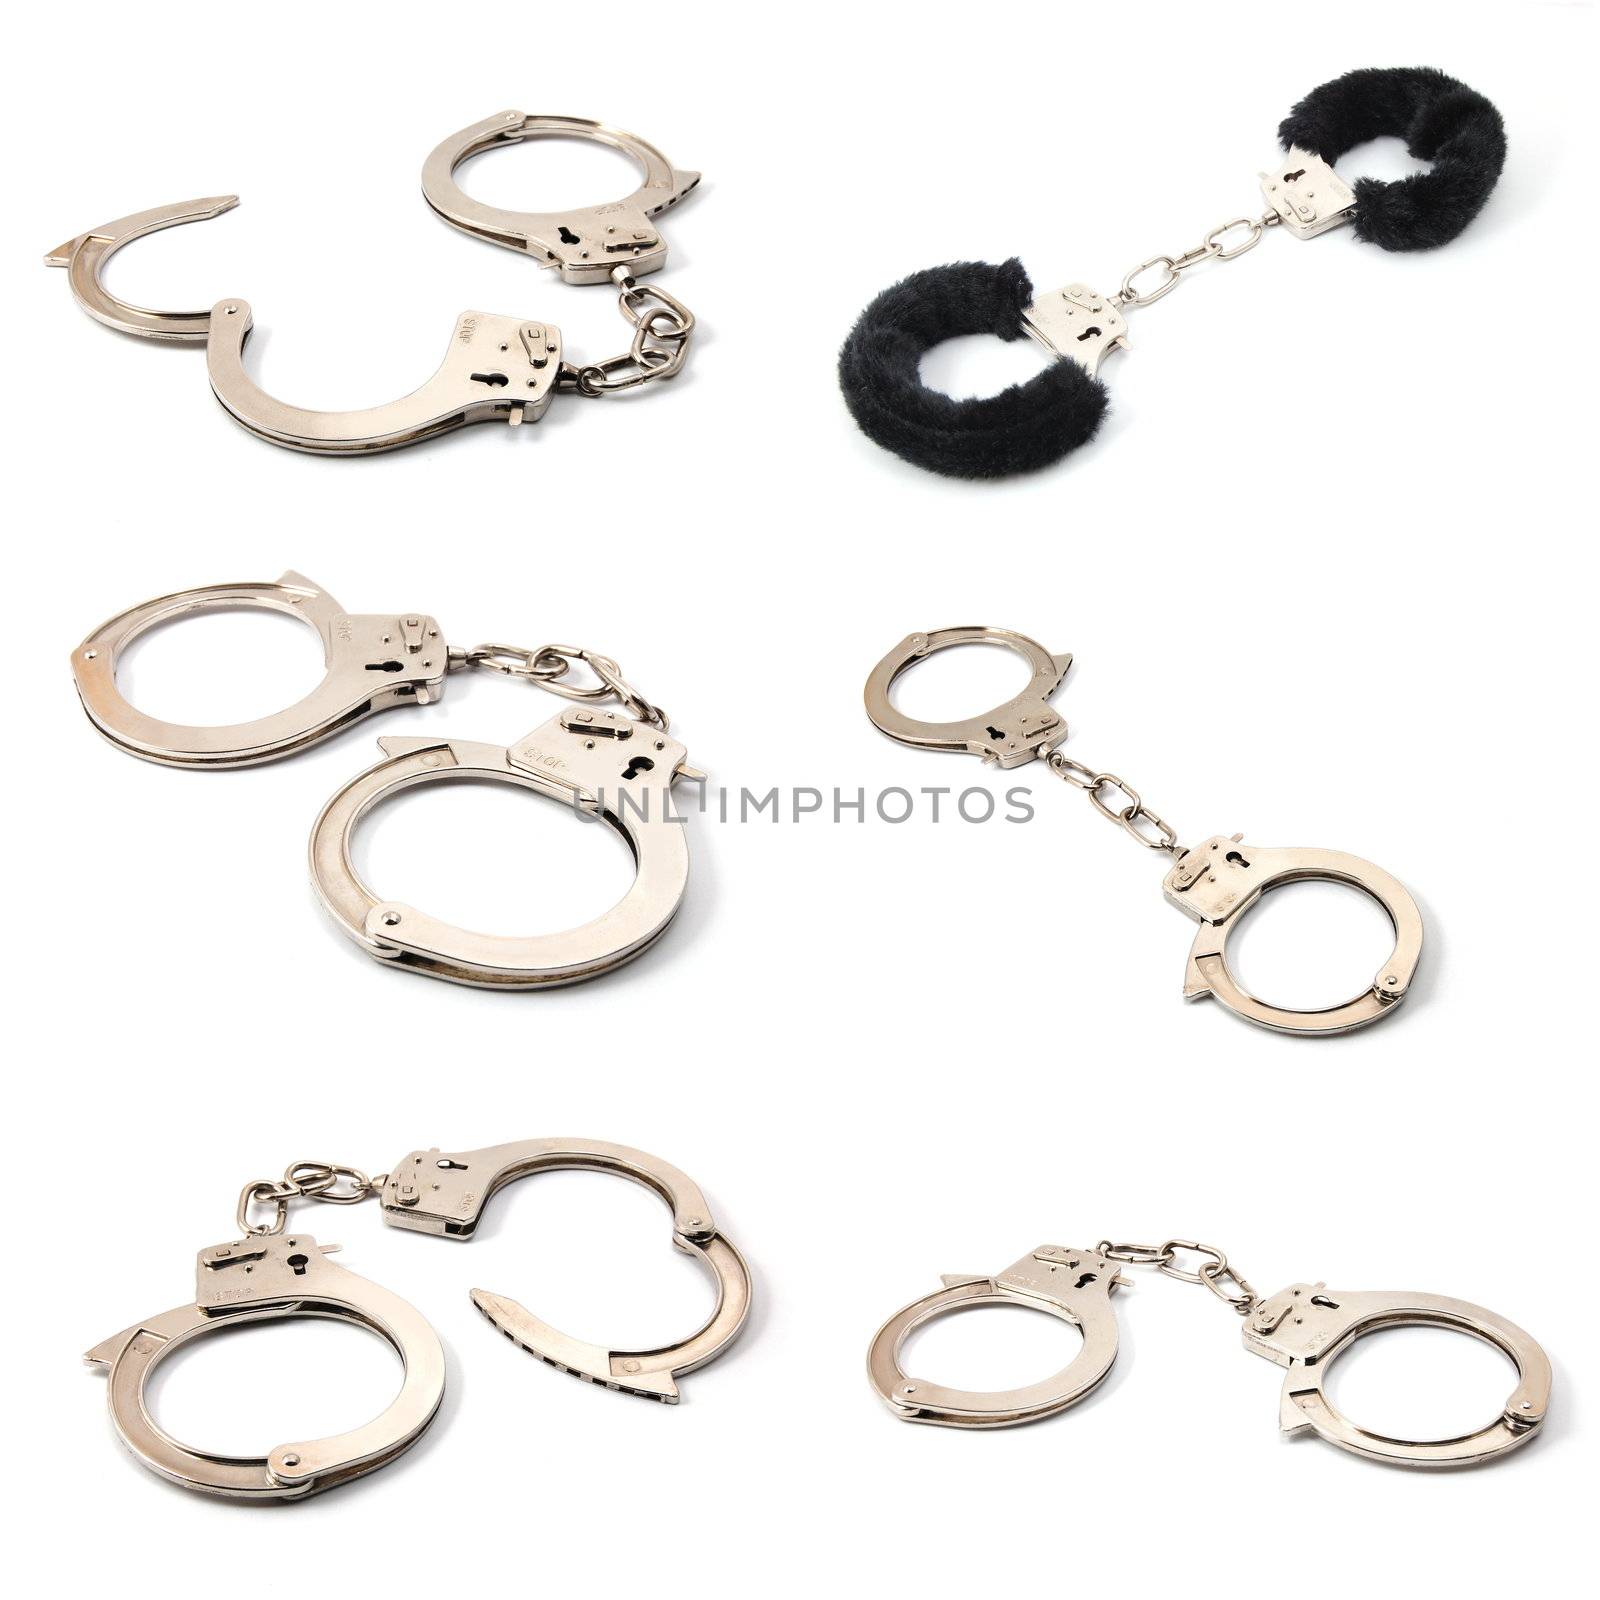 sexy handcuffs collection isolated on white background